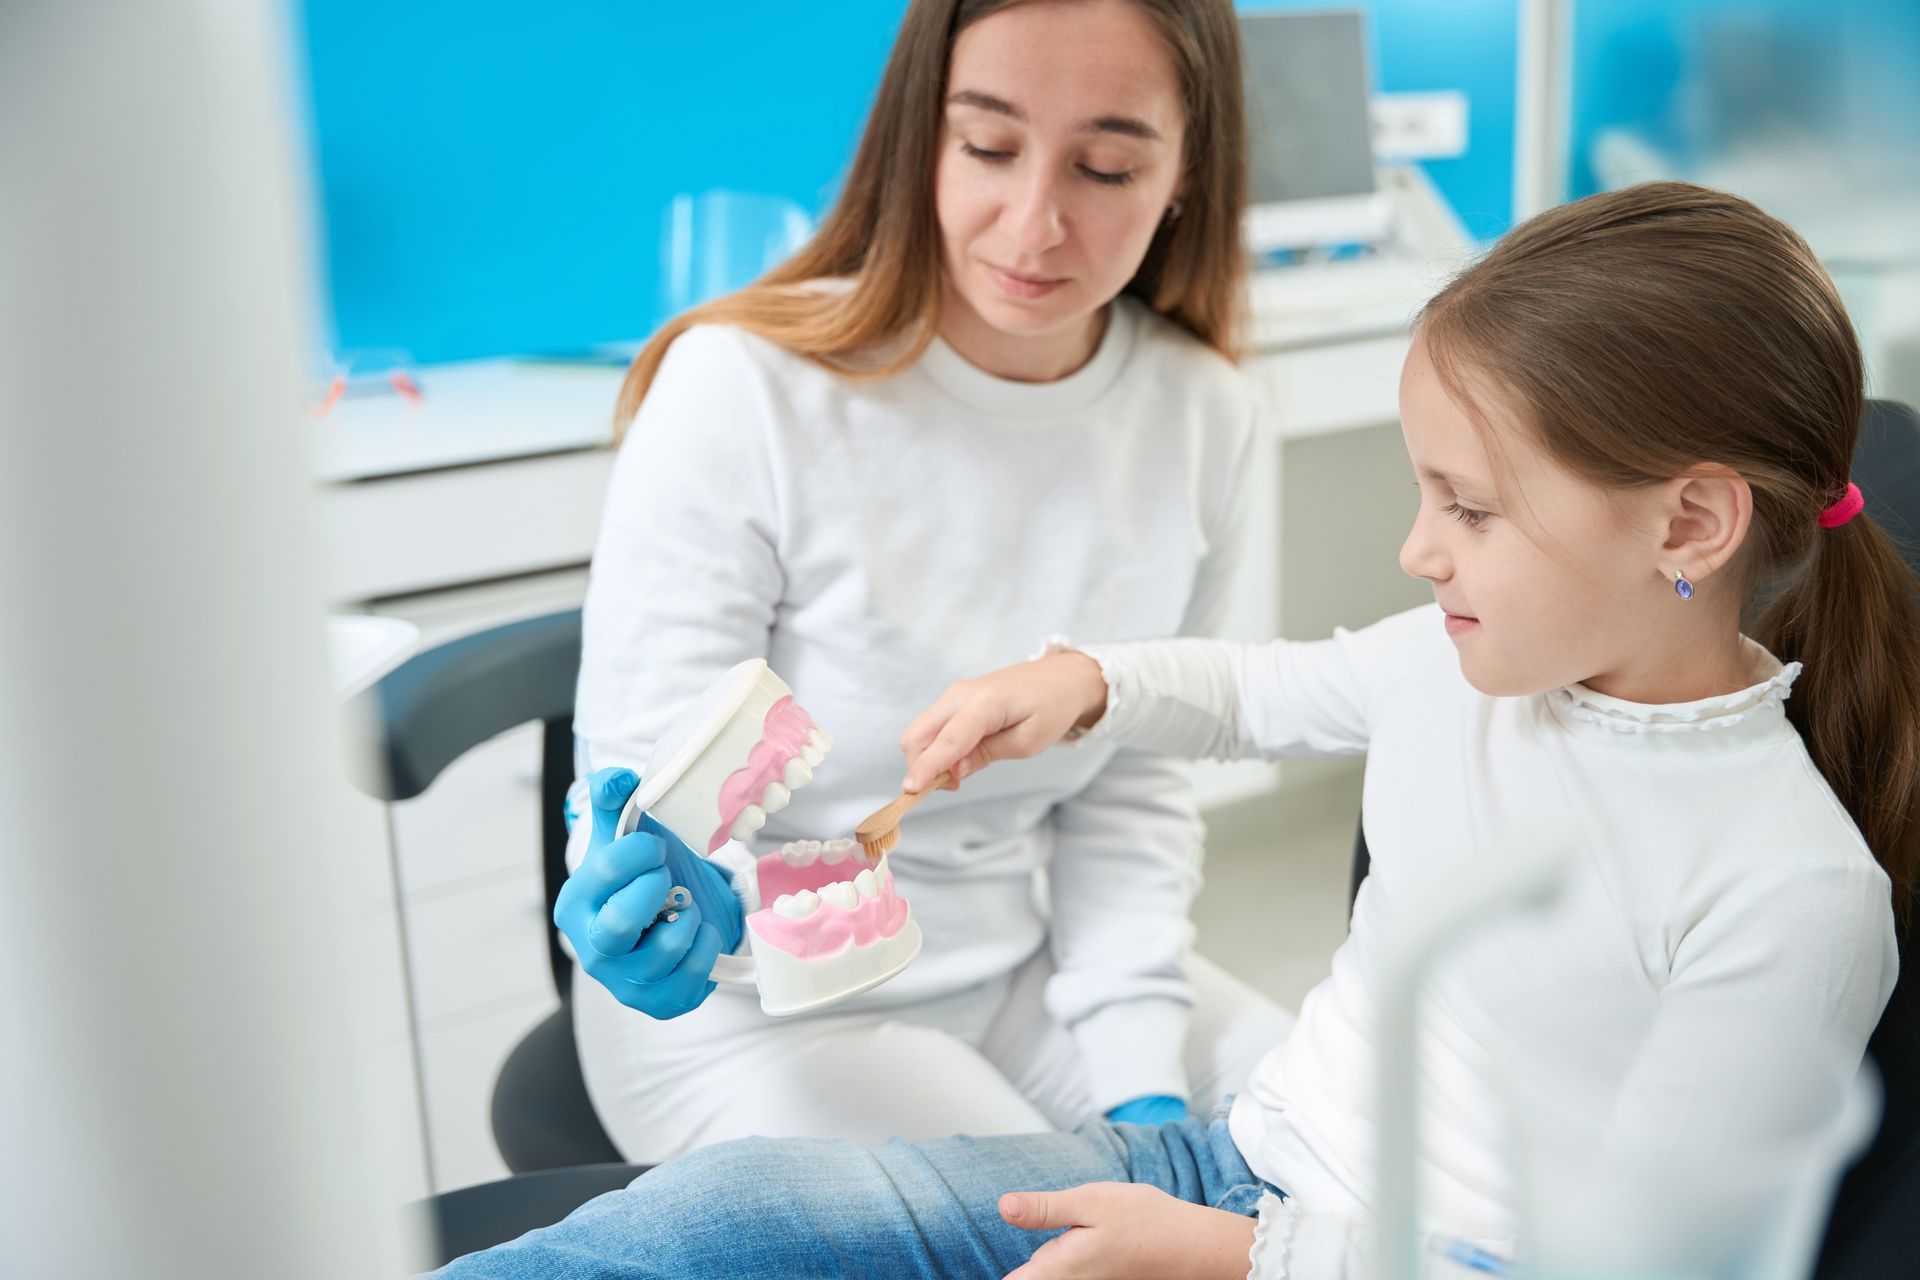 the child practices brushing on fake teeth, while the dentist discusses hmo vs ppo vs epo